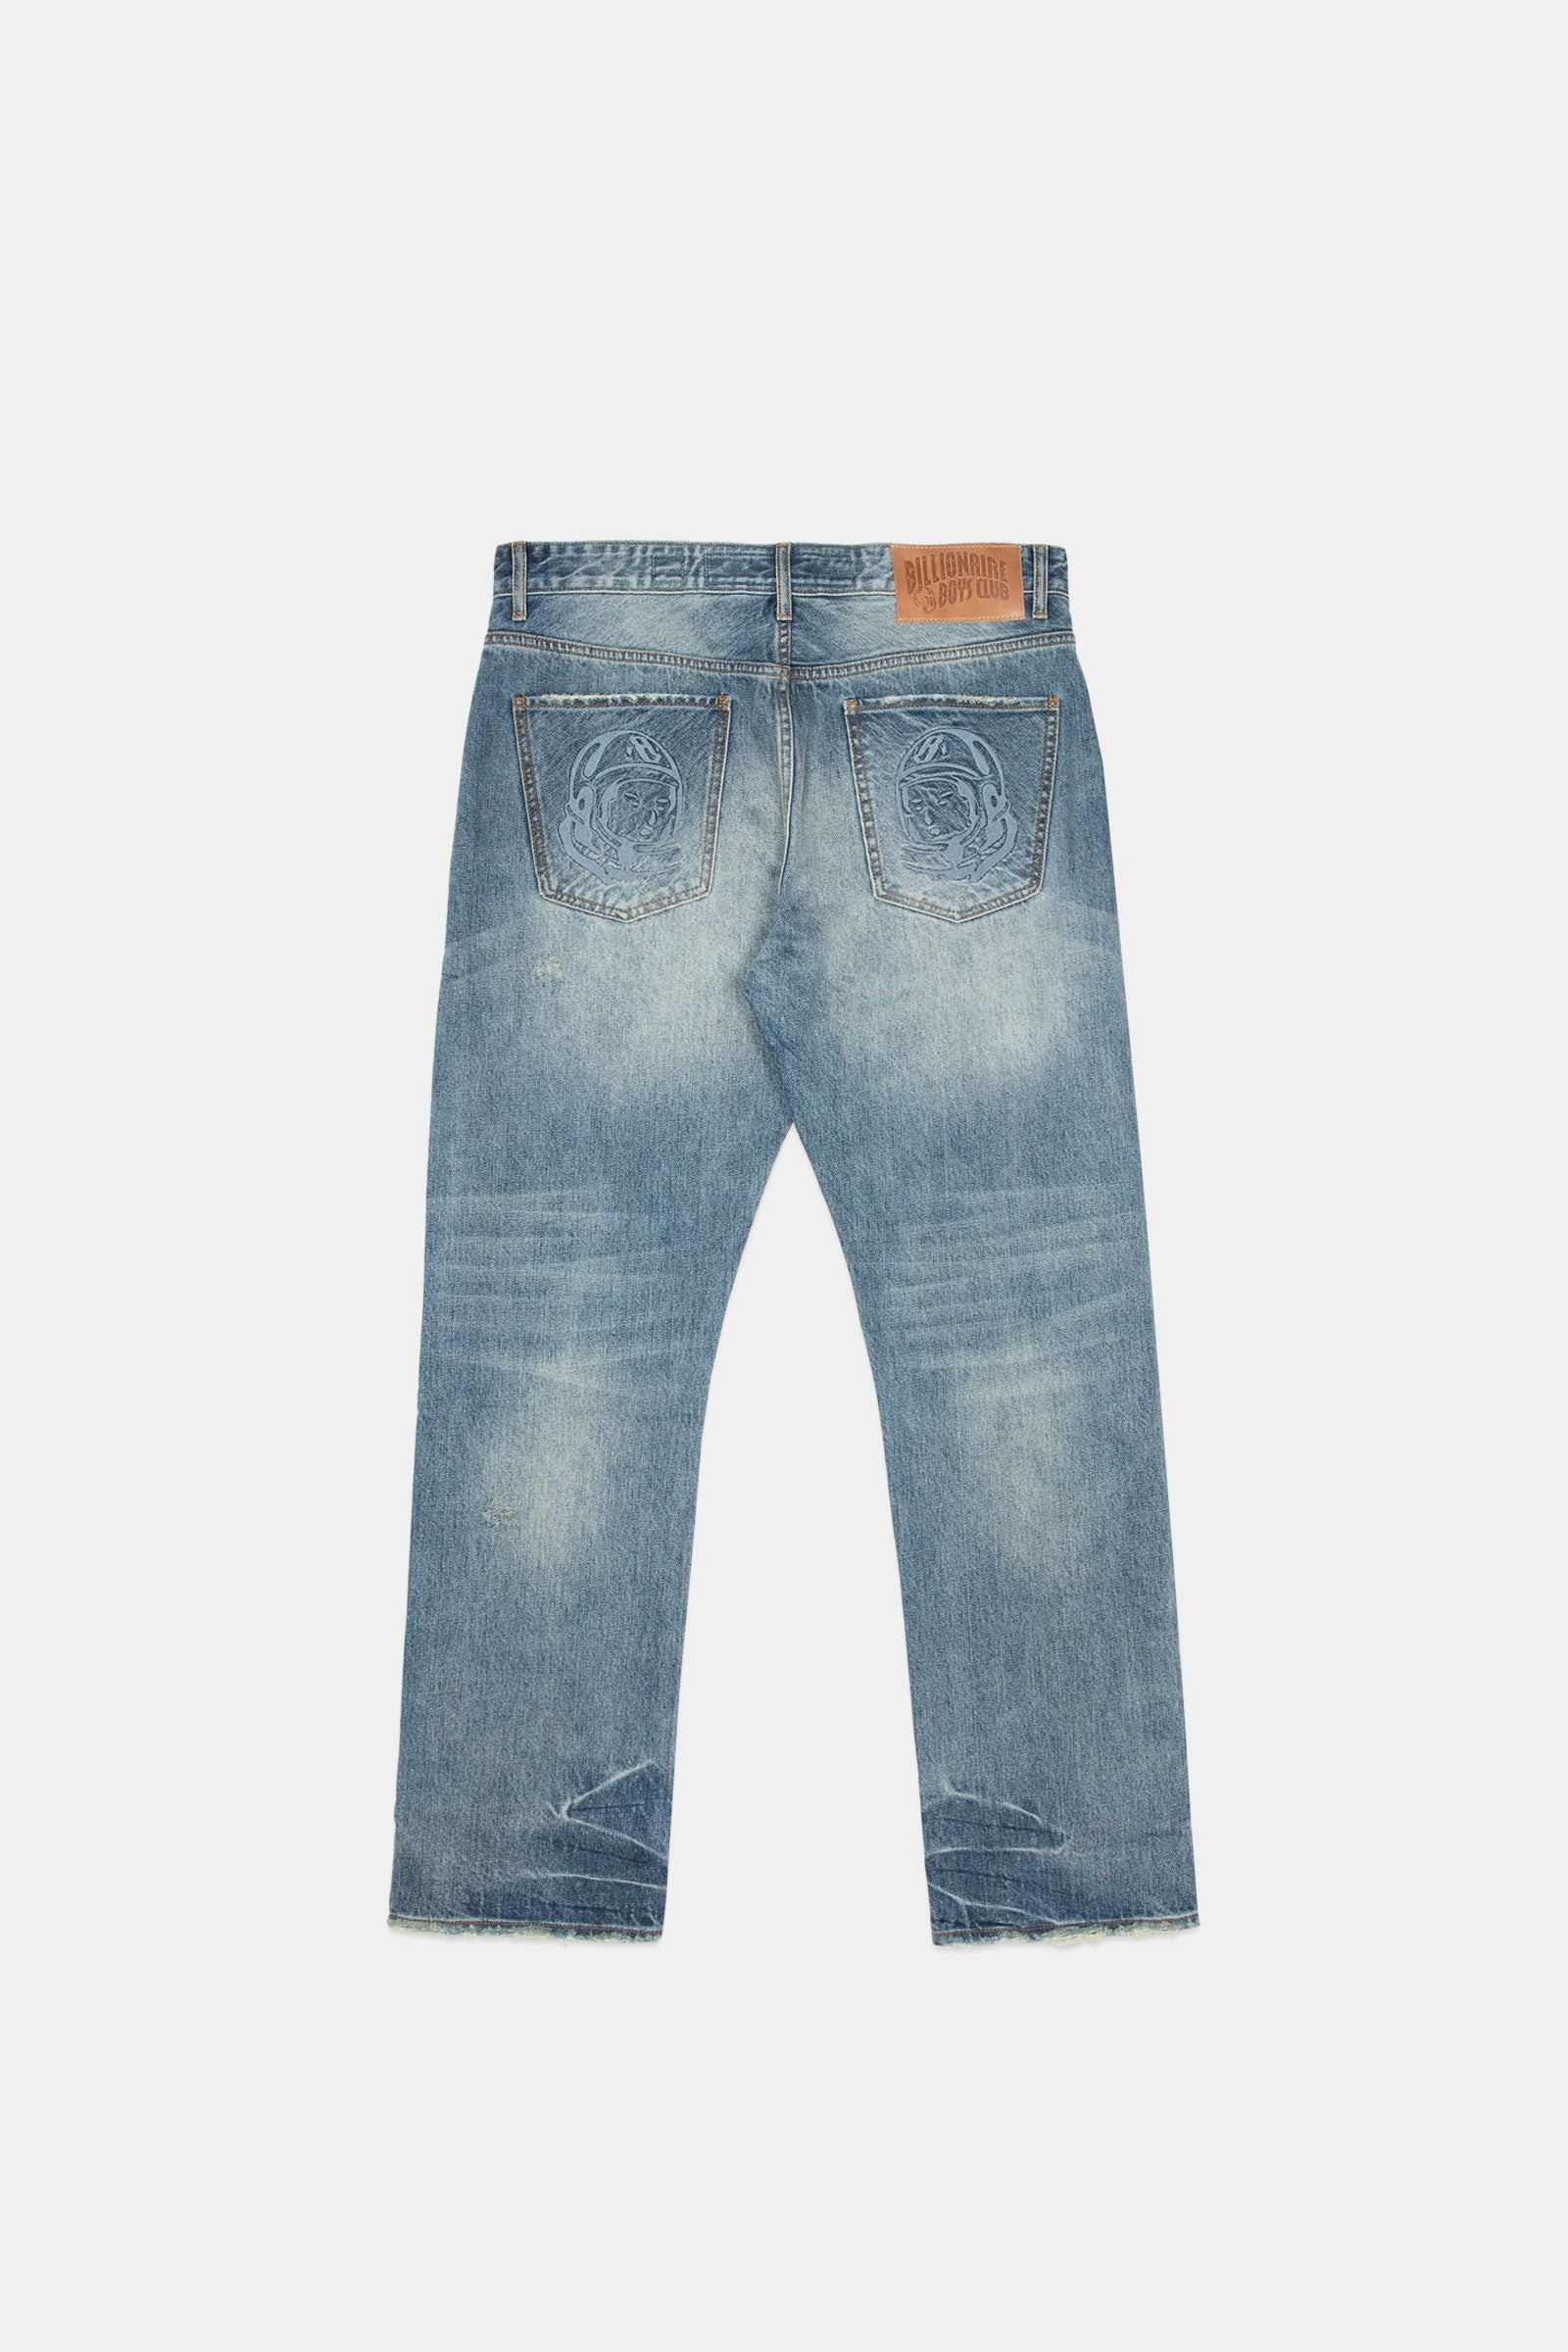 BB Nuclear Jeans